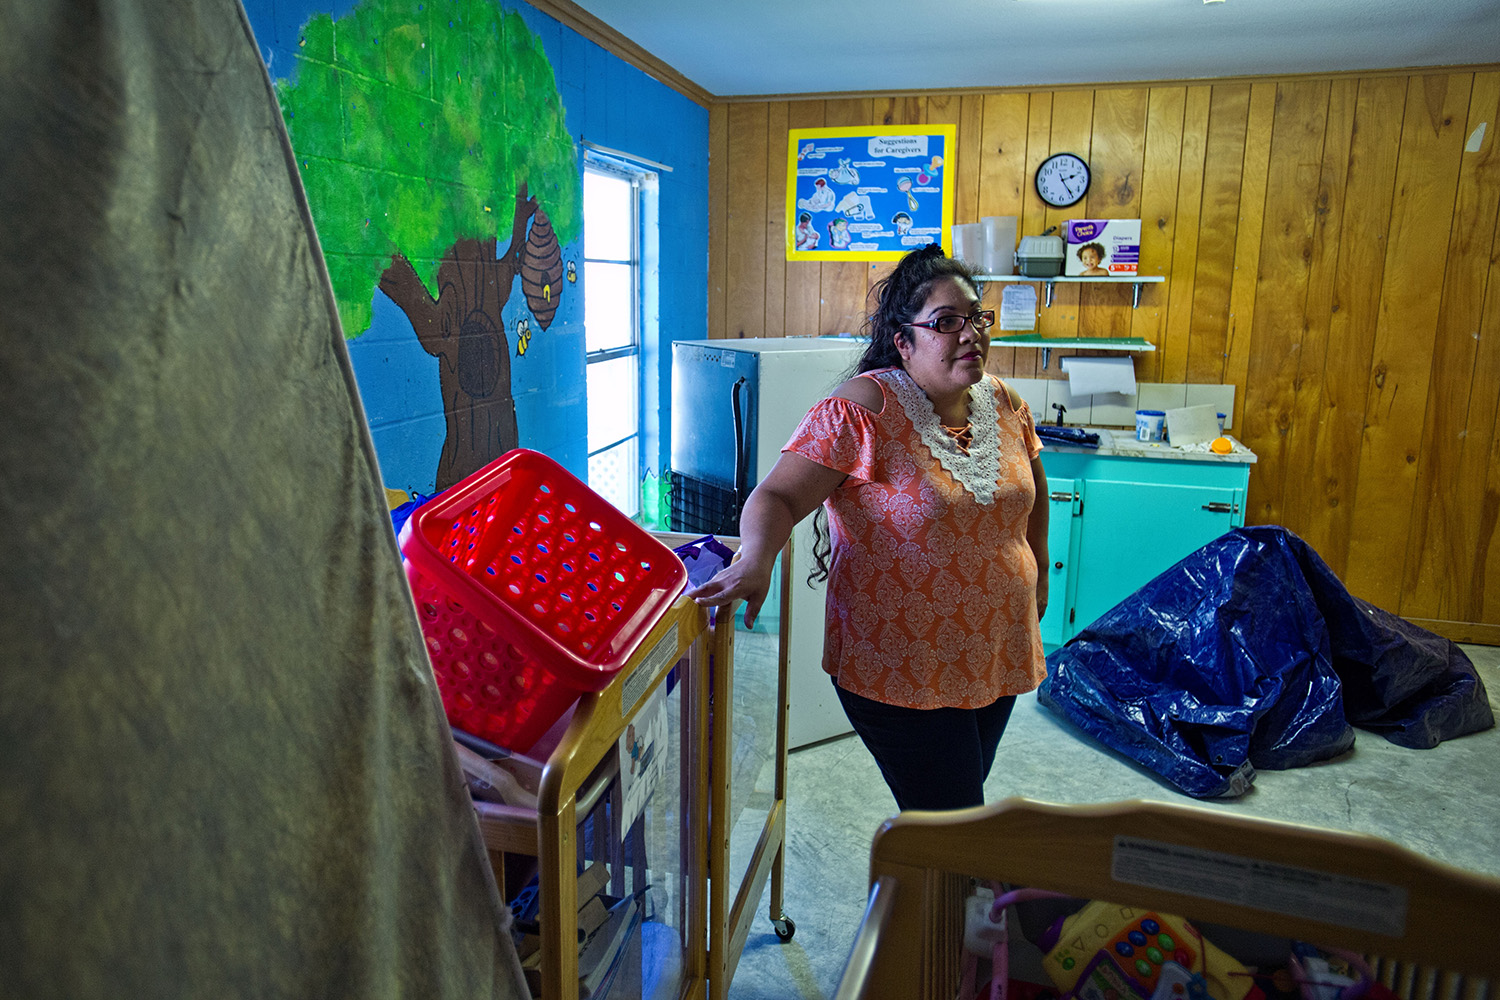 LaVeta Rodriguez, director of the Little Lights Learning Center, stands among the unused cribs, toys and equipment in the baby room at the center.